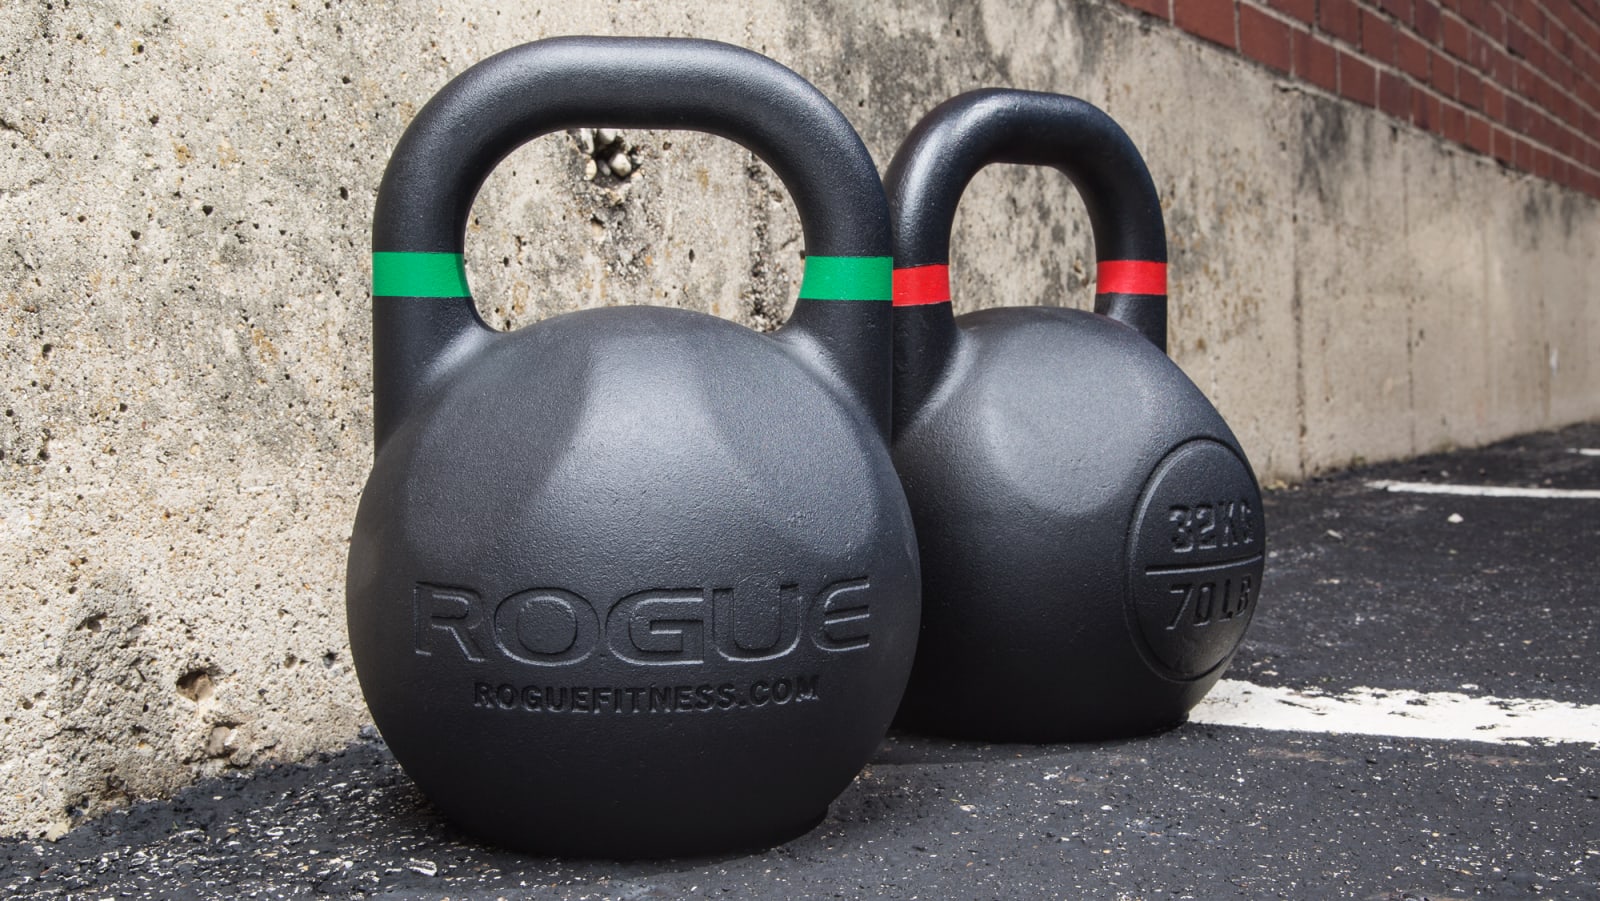 synd Skære Eddike Rogue Competition Kettlebells | Rogue Fitness